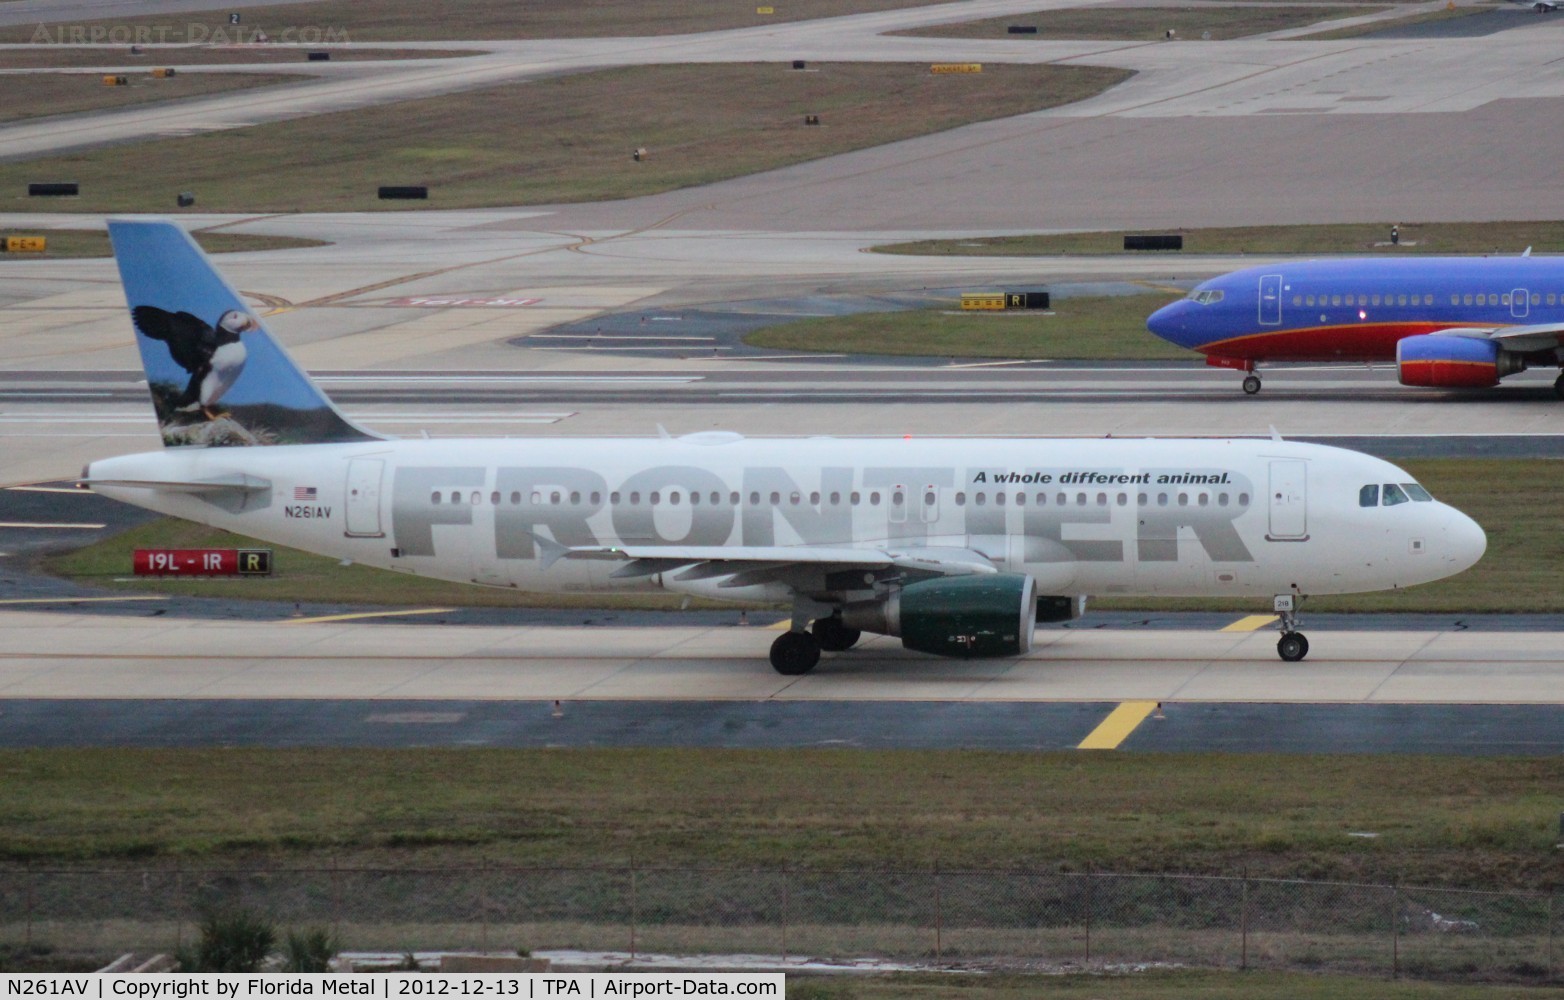 N261AV, 2001 Airbus A320-214 C/N 1615, Frontier Puffin A320 - been re-registered N218FR since photo was taken